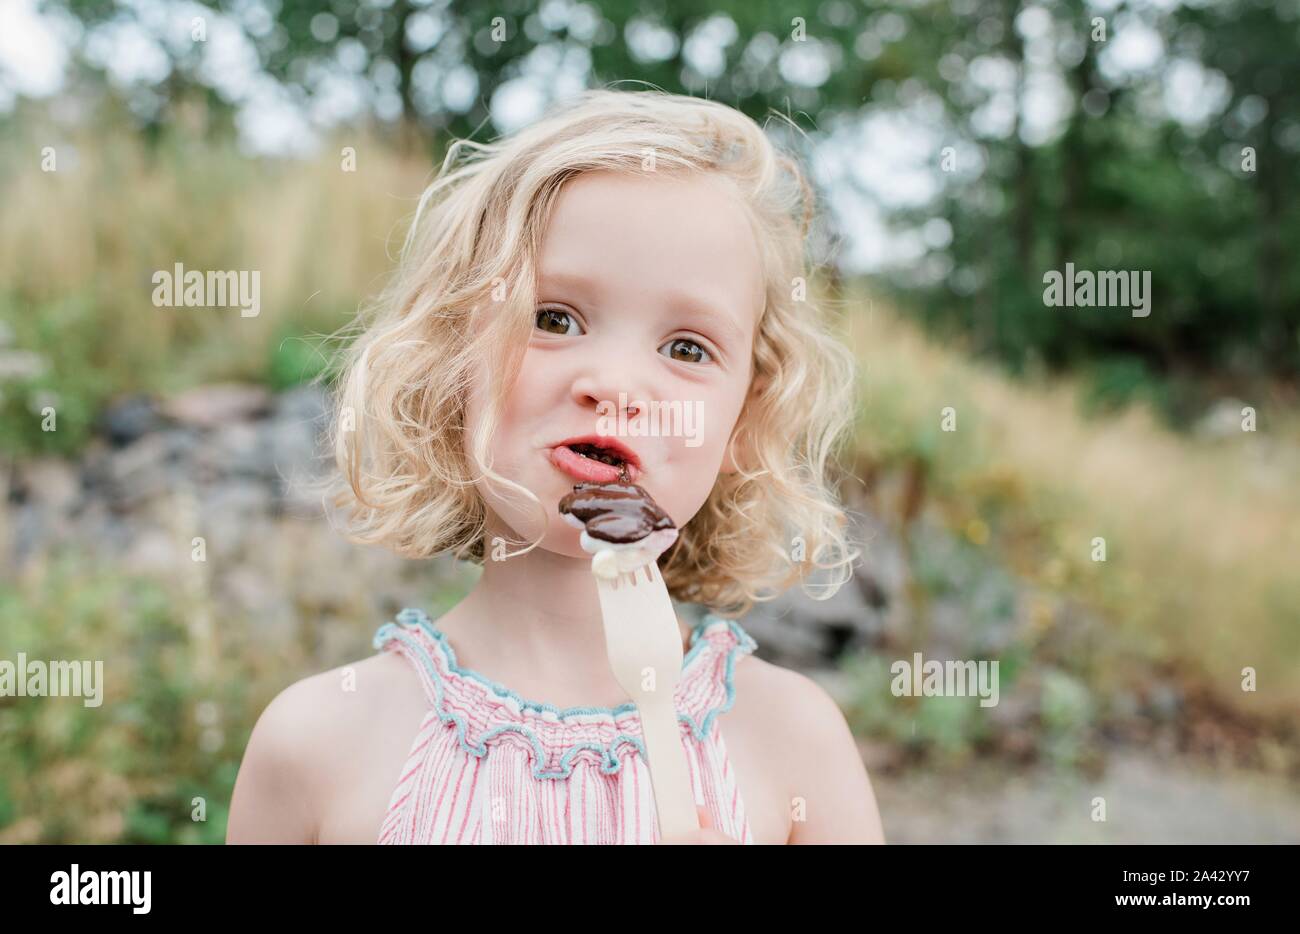 fun portrait of a young girl eating chocolate and marshmallows Stock Photo